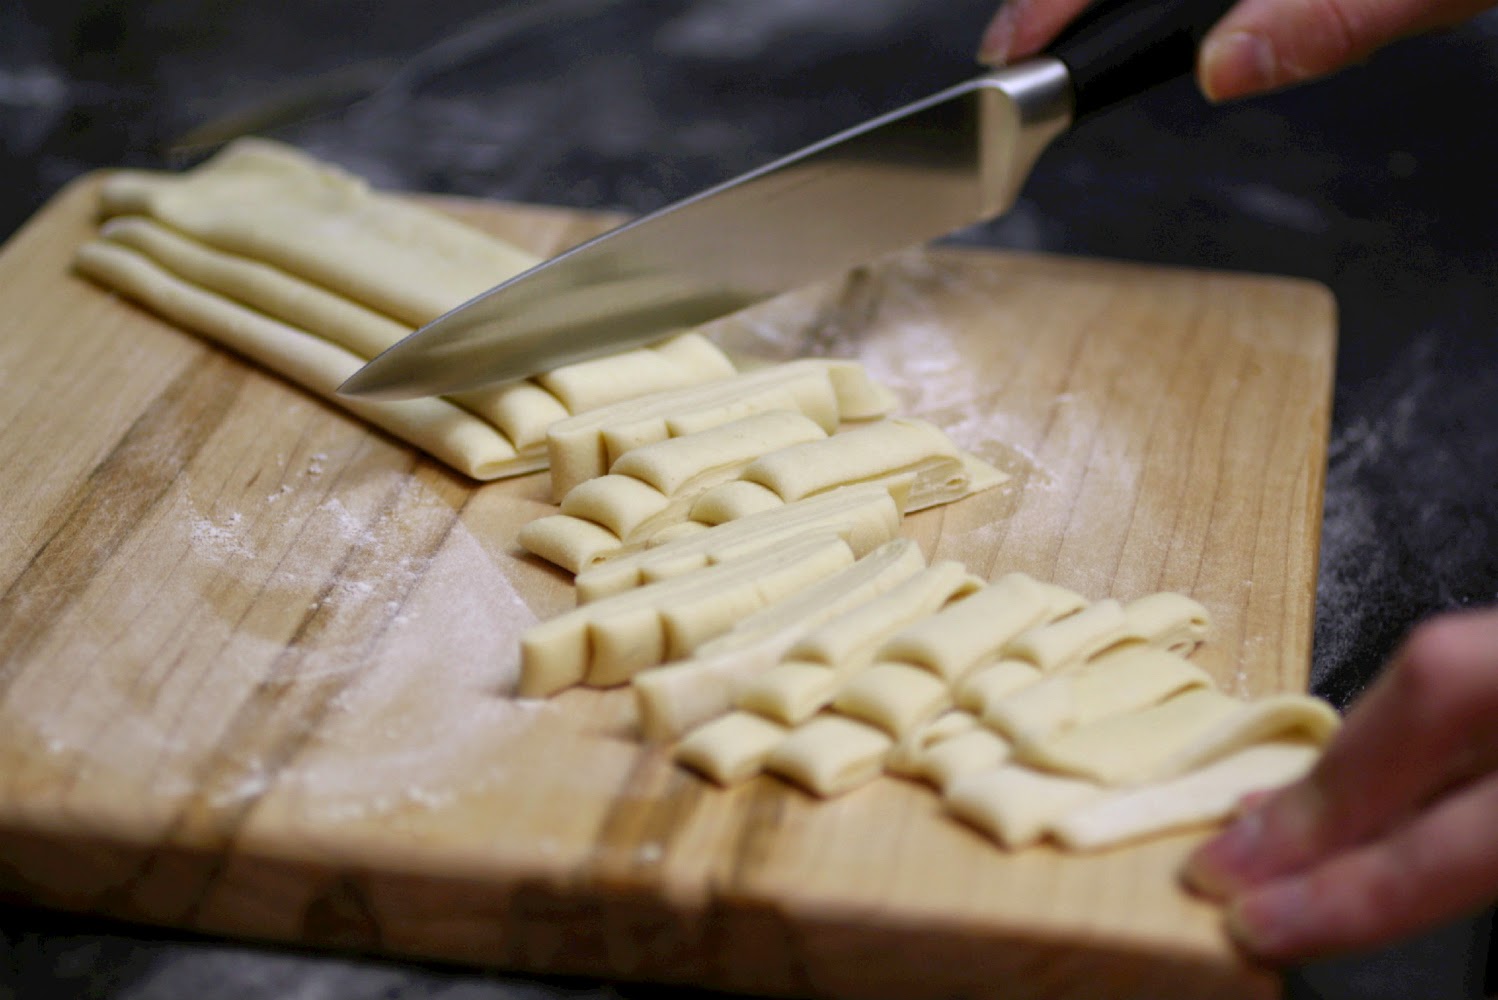 Strozzapreti - hand rolled pasta.  Fresh pasta is so much better than anything bought from the supermarket and is so easy to make!  This is a recipe my sister showed me using her Italian friend's instructions.